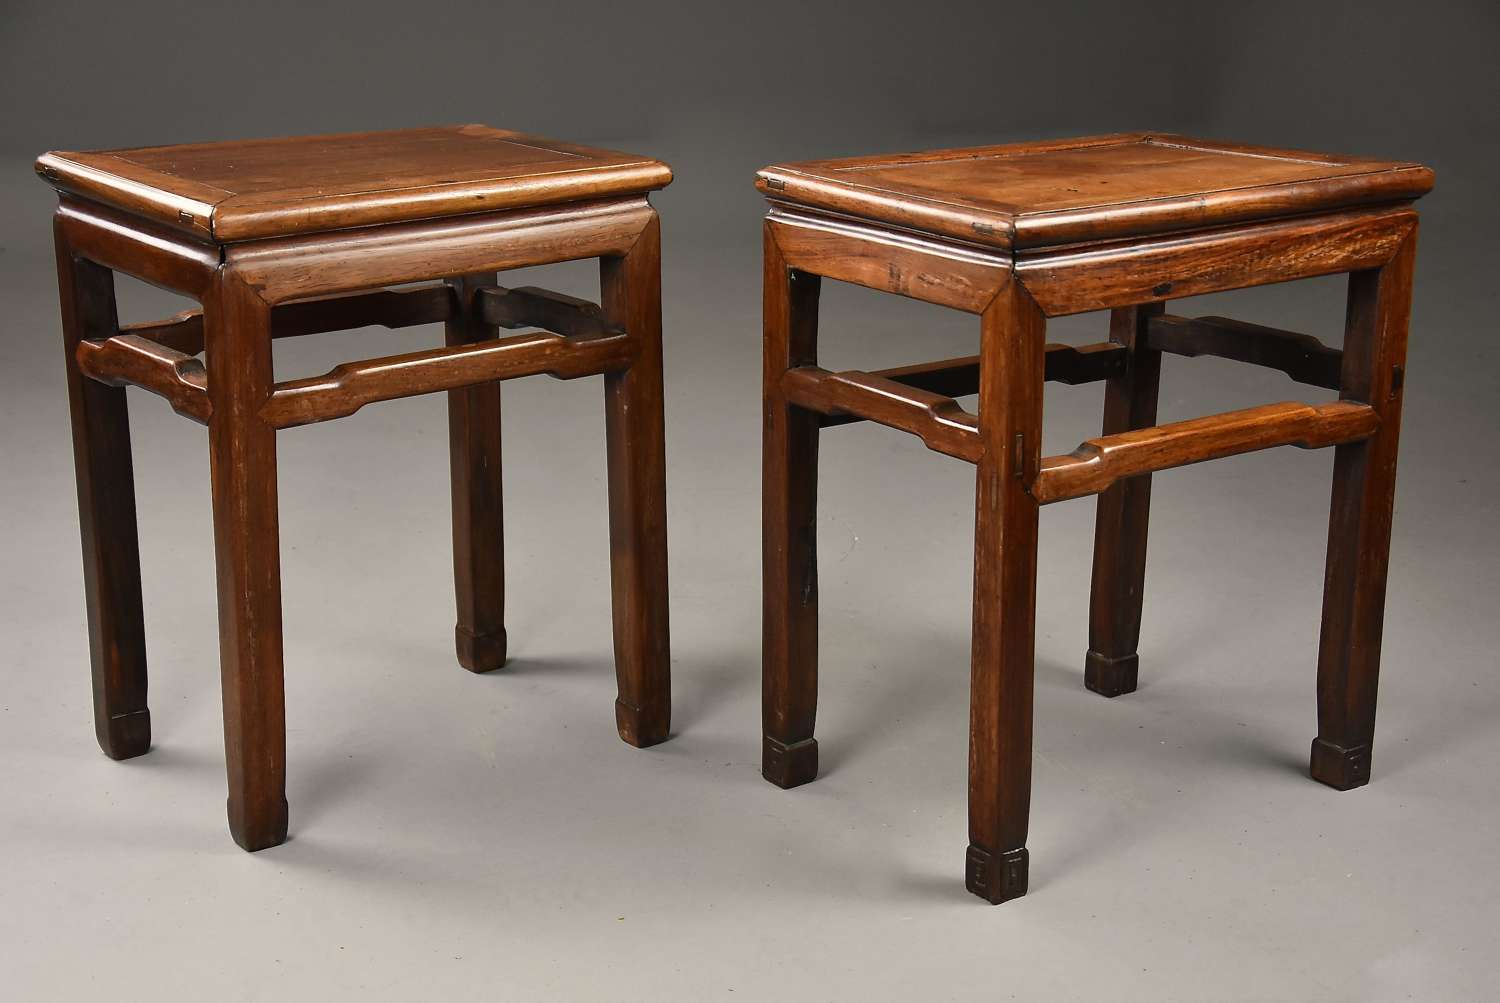 Near pair of late 19thc Chinese Ming style lamp tables or stands